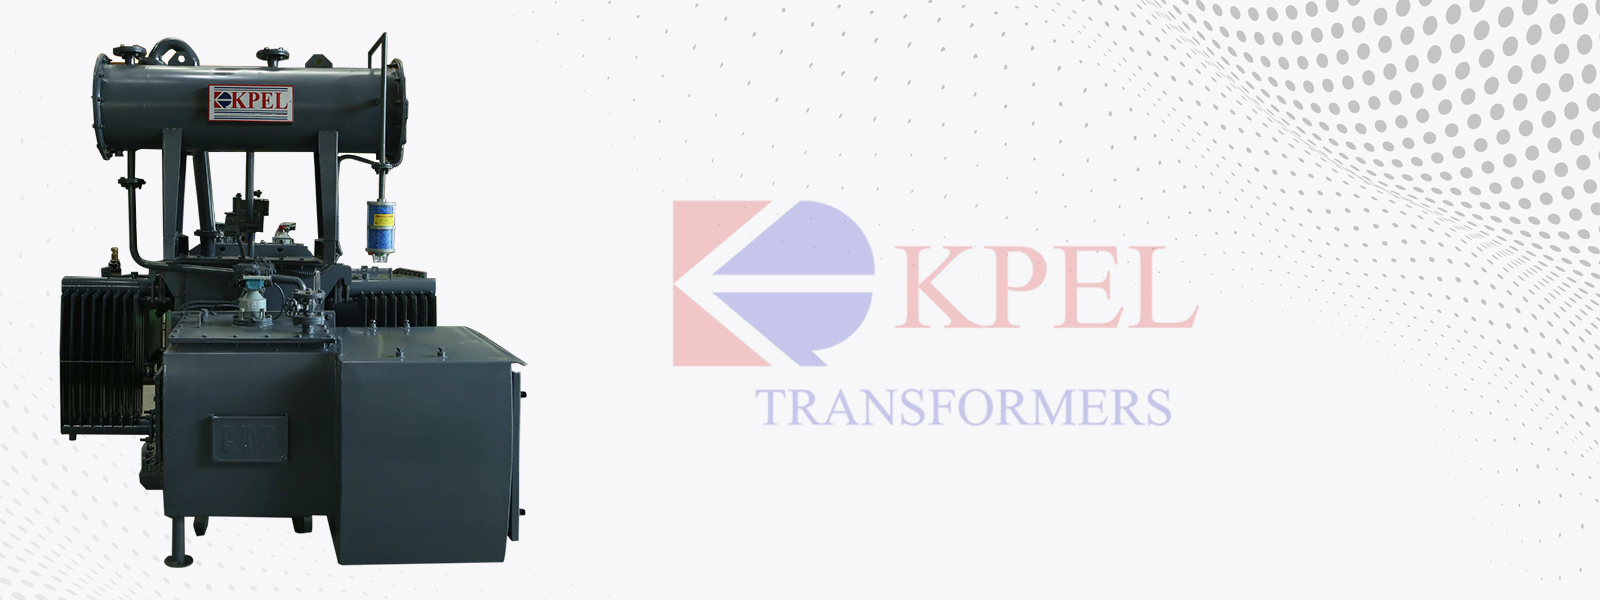 Three Phase Transformer Manufacturers in India